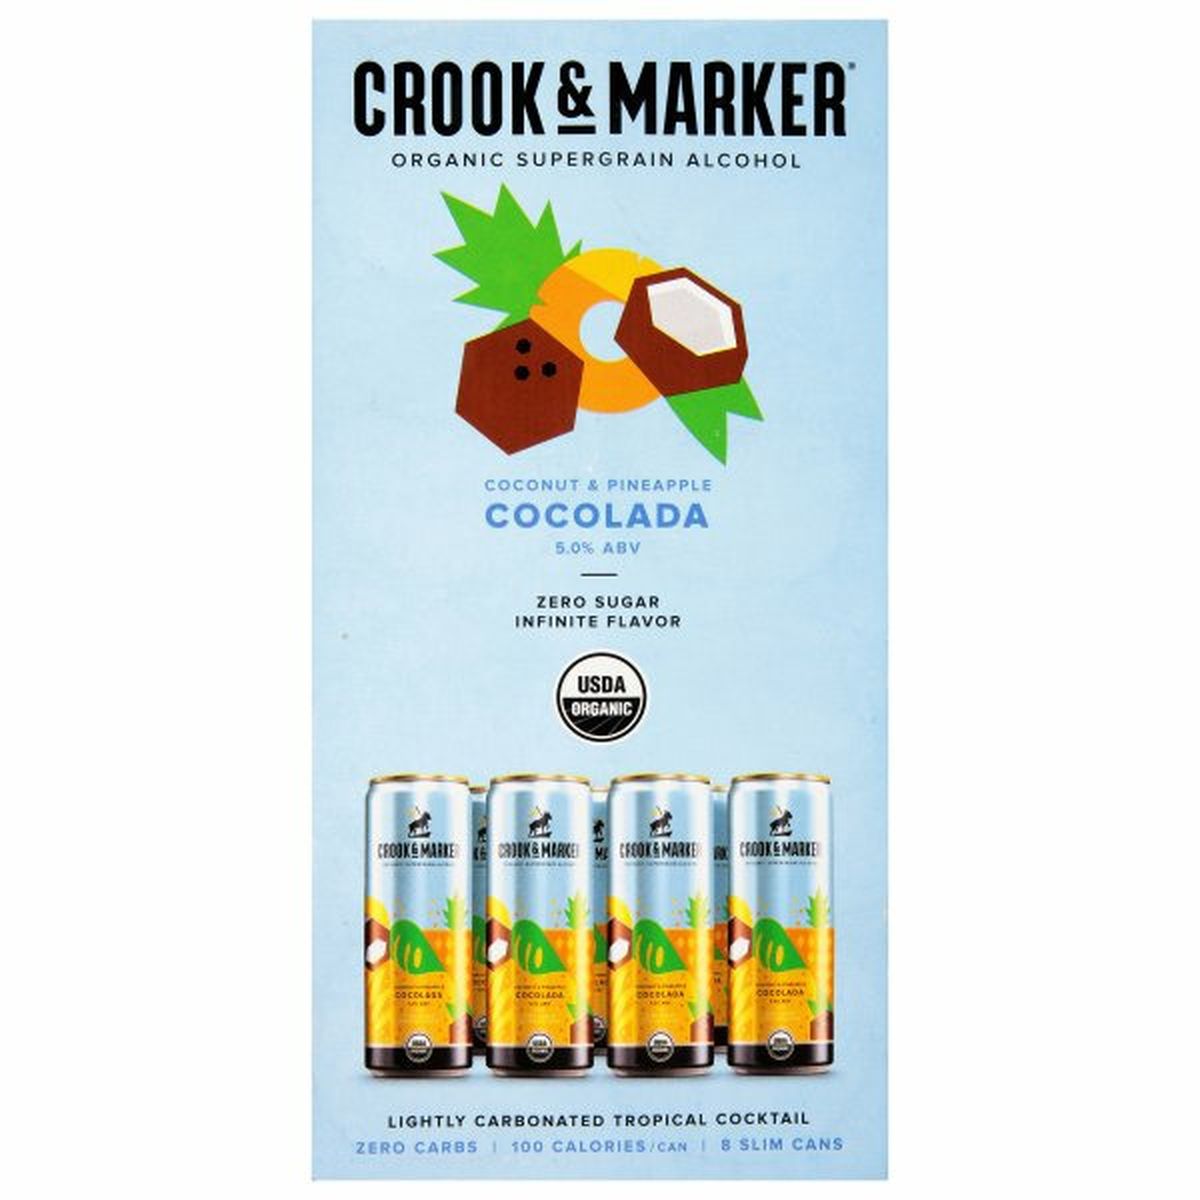 Calories in Crook & Marker Coconut & Pineapple Cocolada 8/11.5oz cans